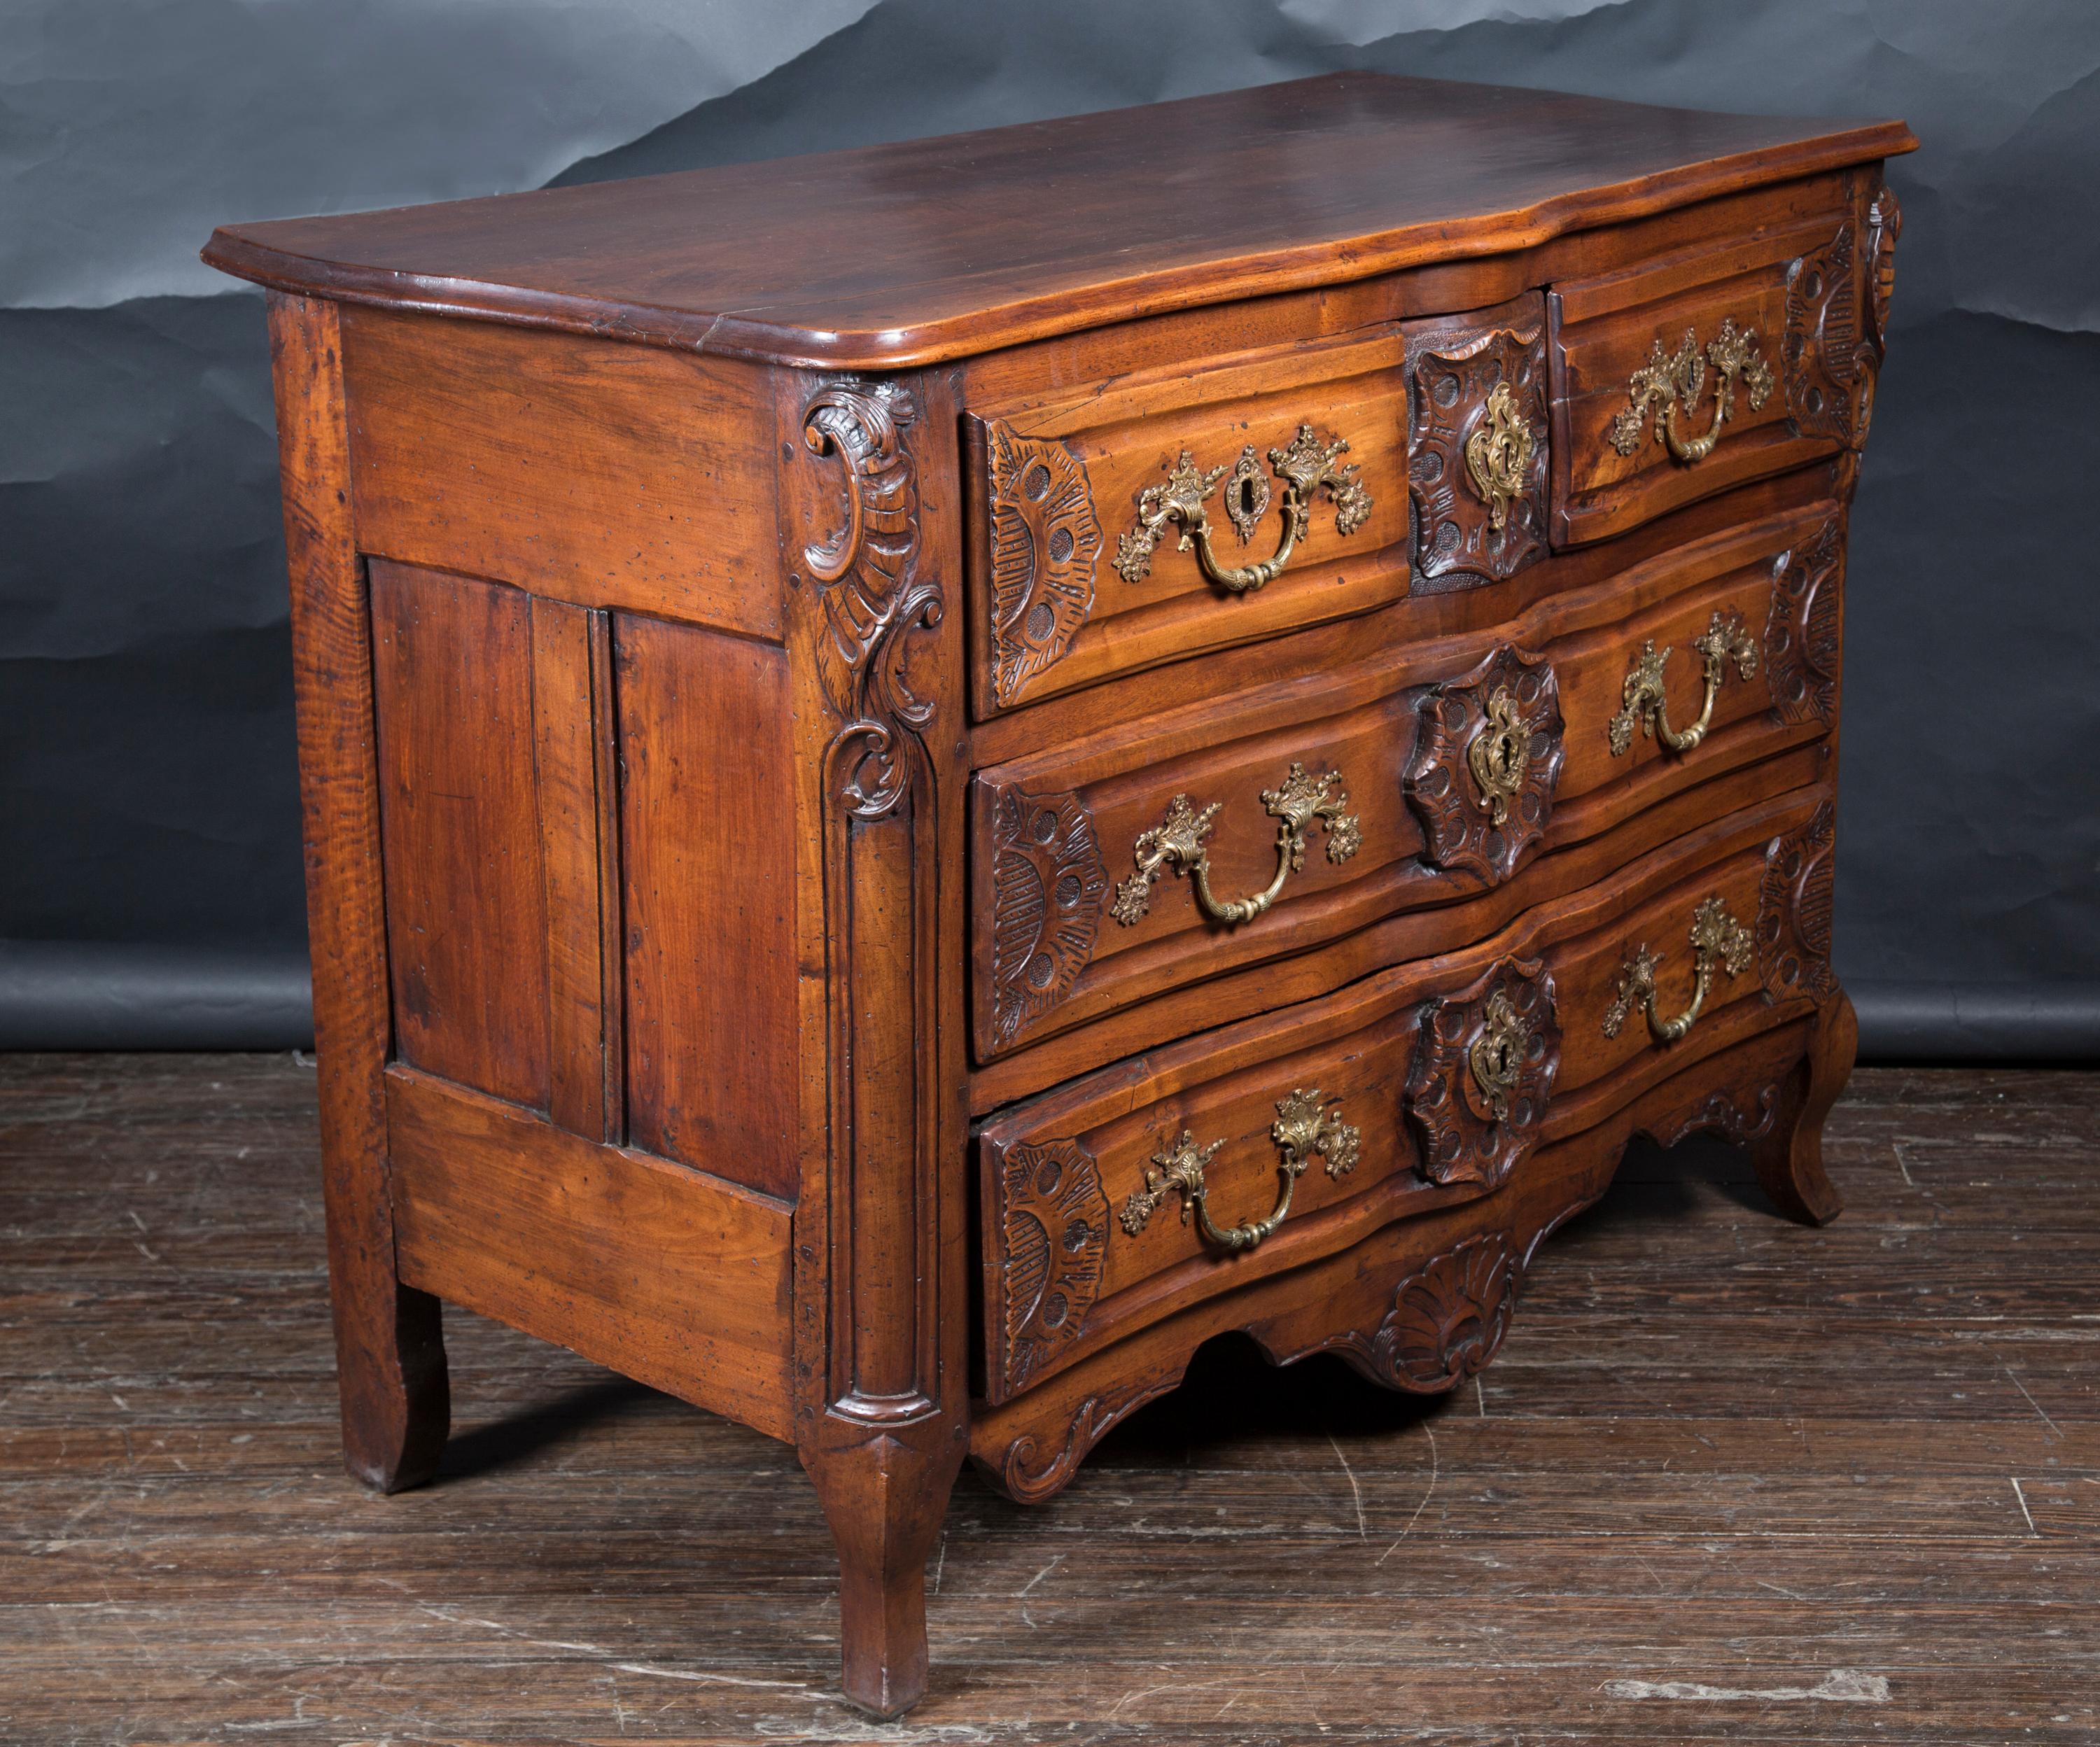 This rare and unusual Lyonnaise commode dates back to the 18th century and is made of beautifully carved walnut. The piece features five drawers with the original bronze handles and escutcheons. The top row features a secret center drawer that opens